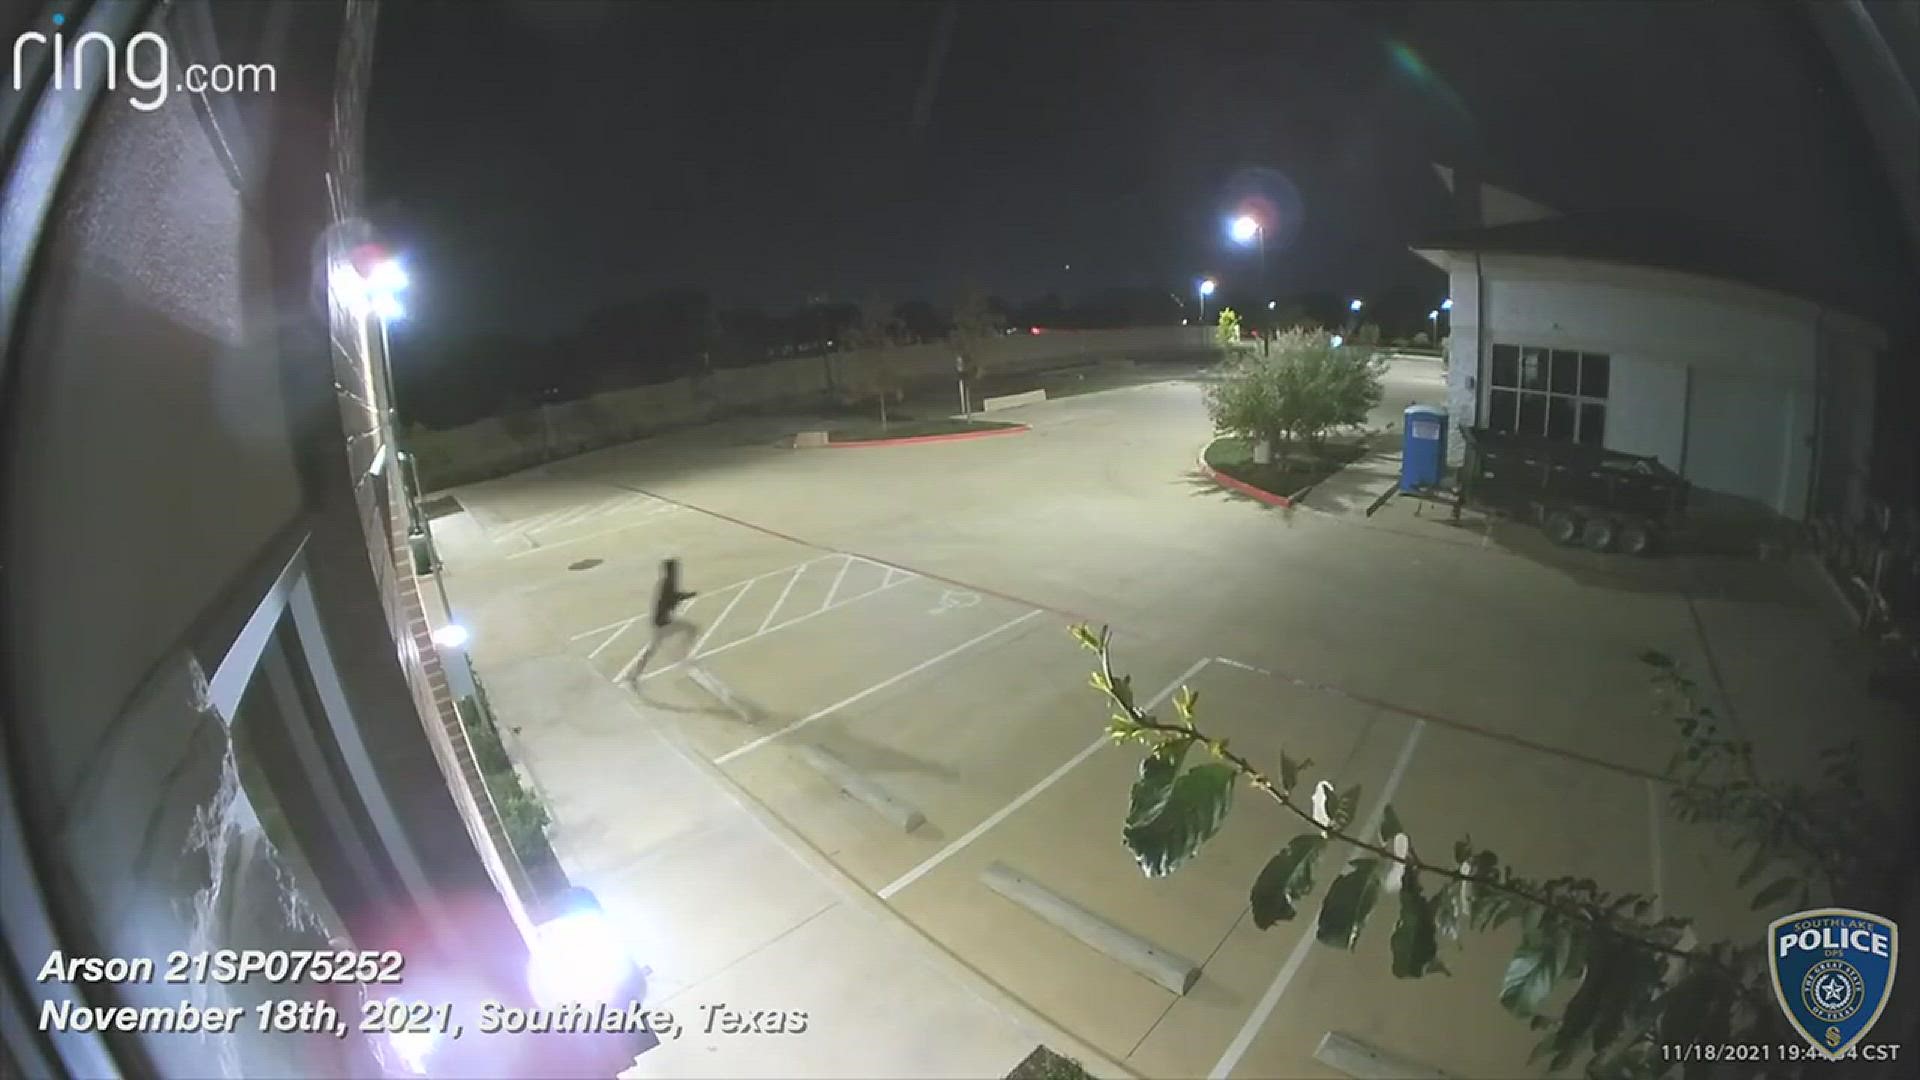 FIRE IN THE HOLE: Can you help @ SouthlakeDPS identify the suspects who blew up a port-a-potty?